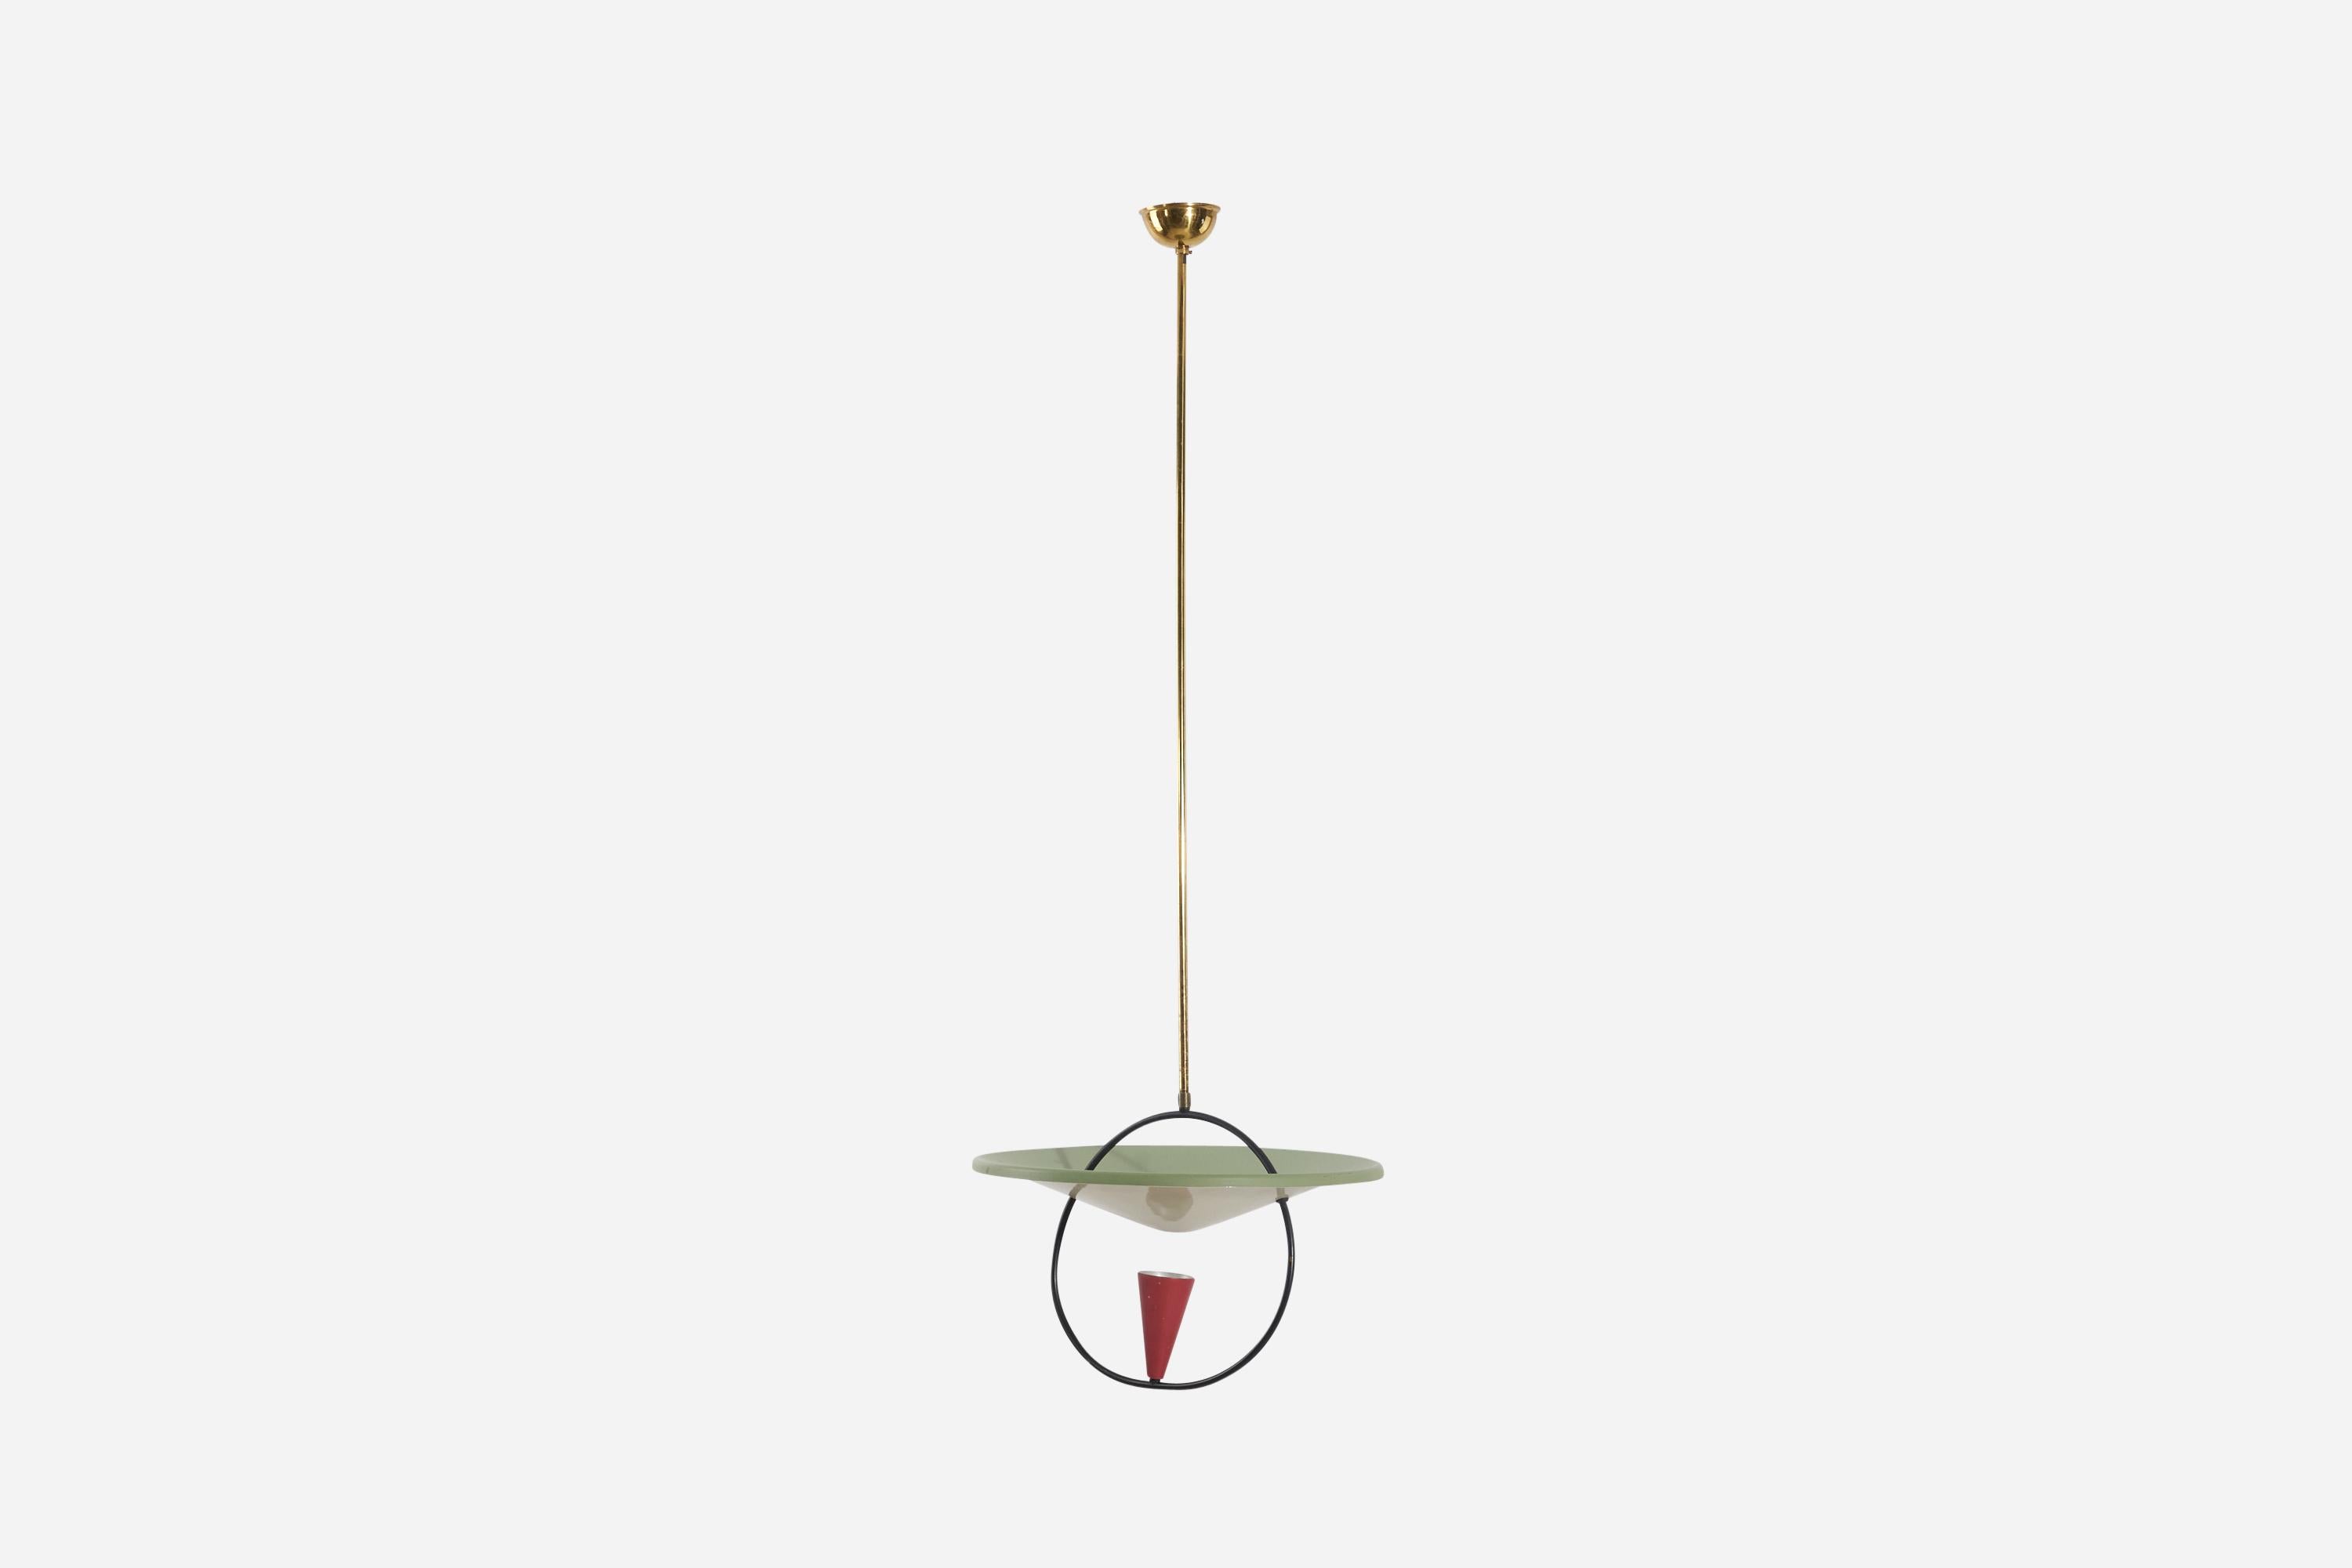 A brass and red, black and green-lacquered metal pendant light designed and produced by an Italian designer, Italy, 1960s.

Dimensions of Canopy (inches) : 1.52 x 3.17 x 3.17 (height x width x depth).

Socket takes E-14 bulb.
There is no